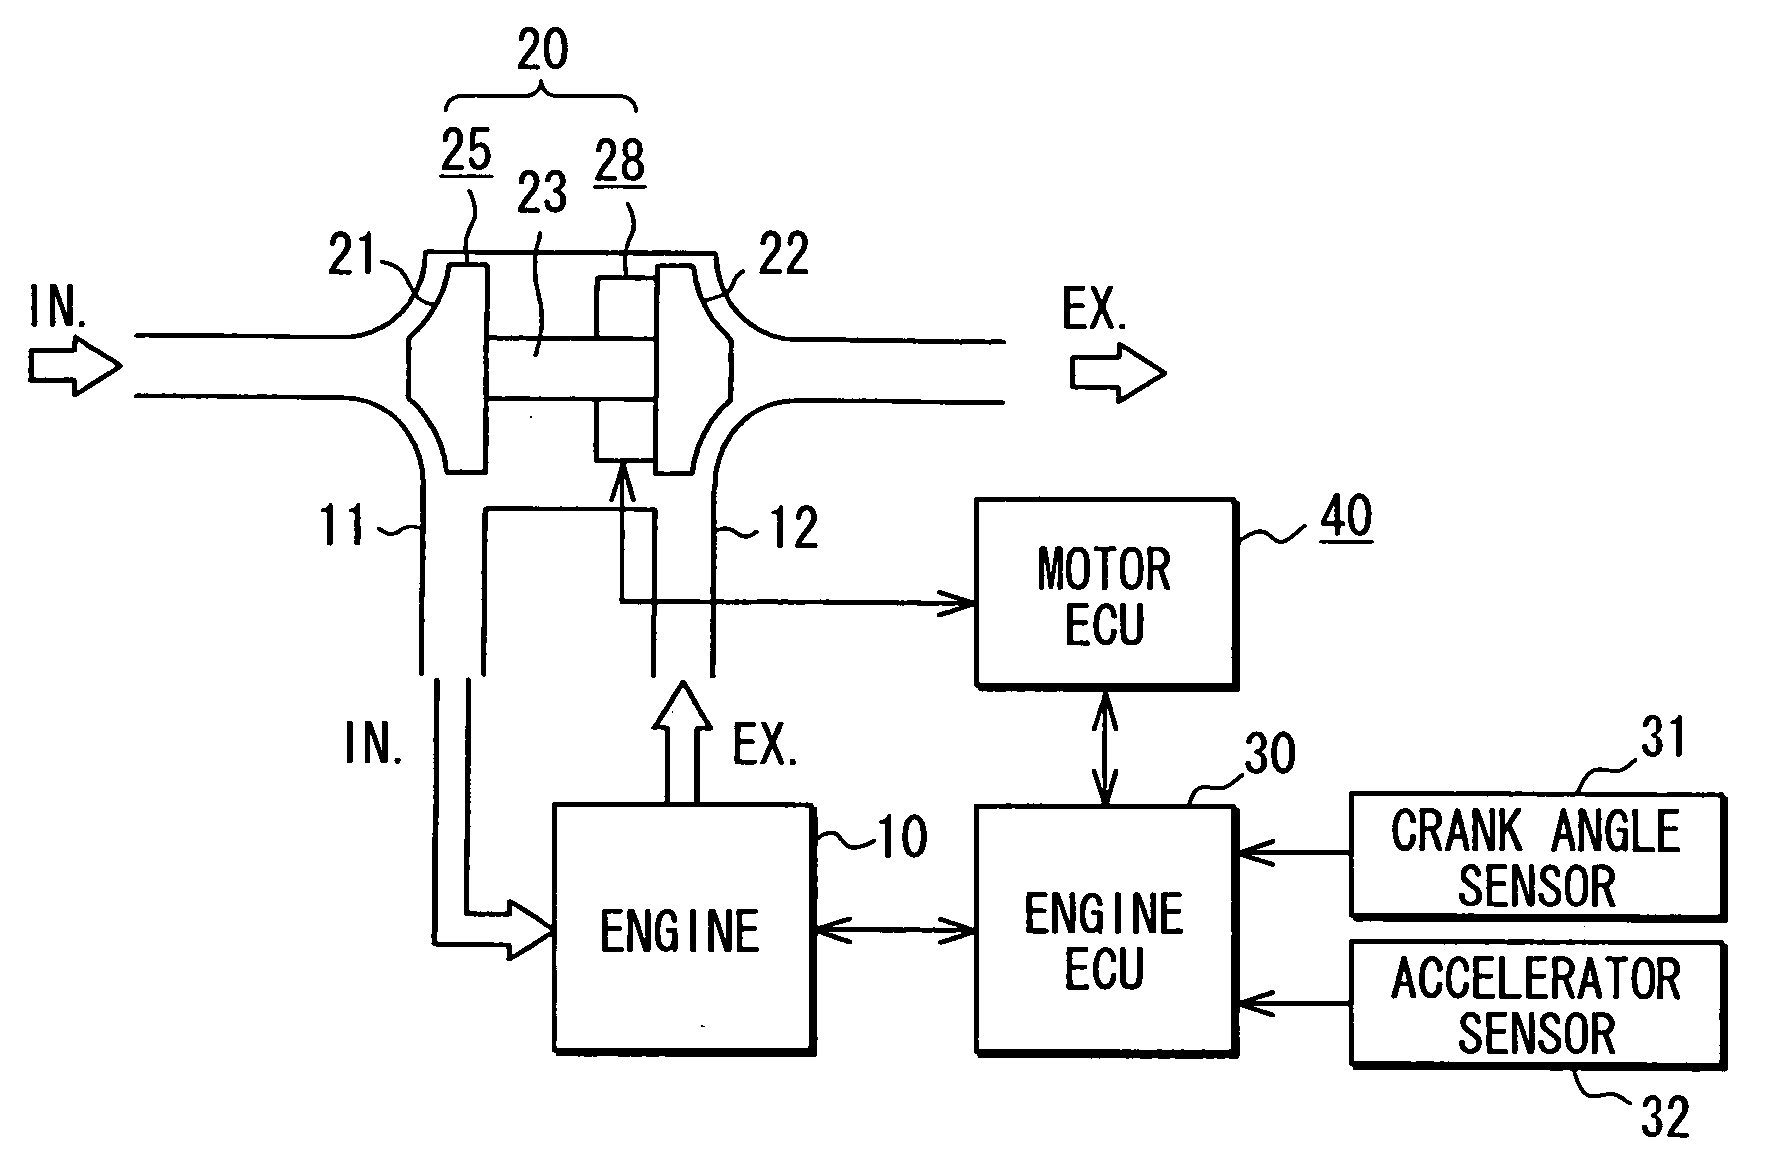 Controller for turbocharger with electric motor